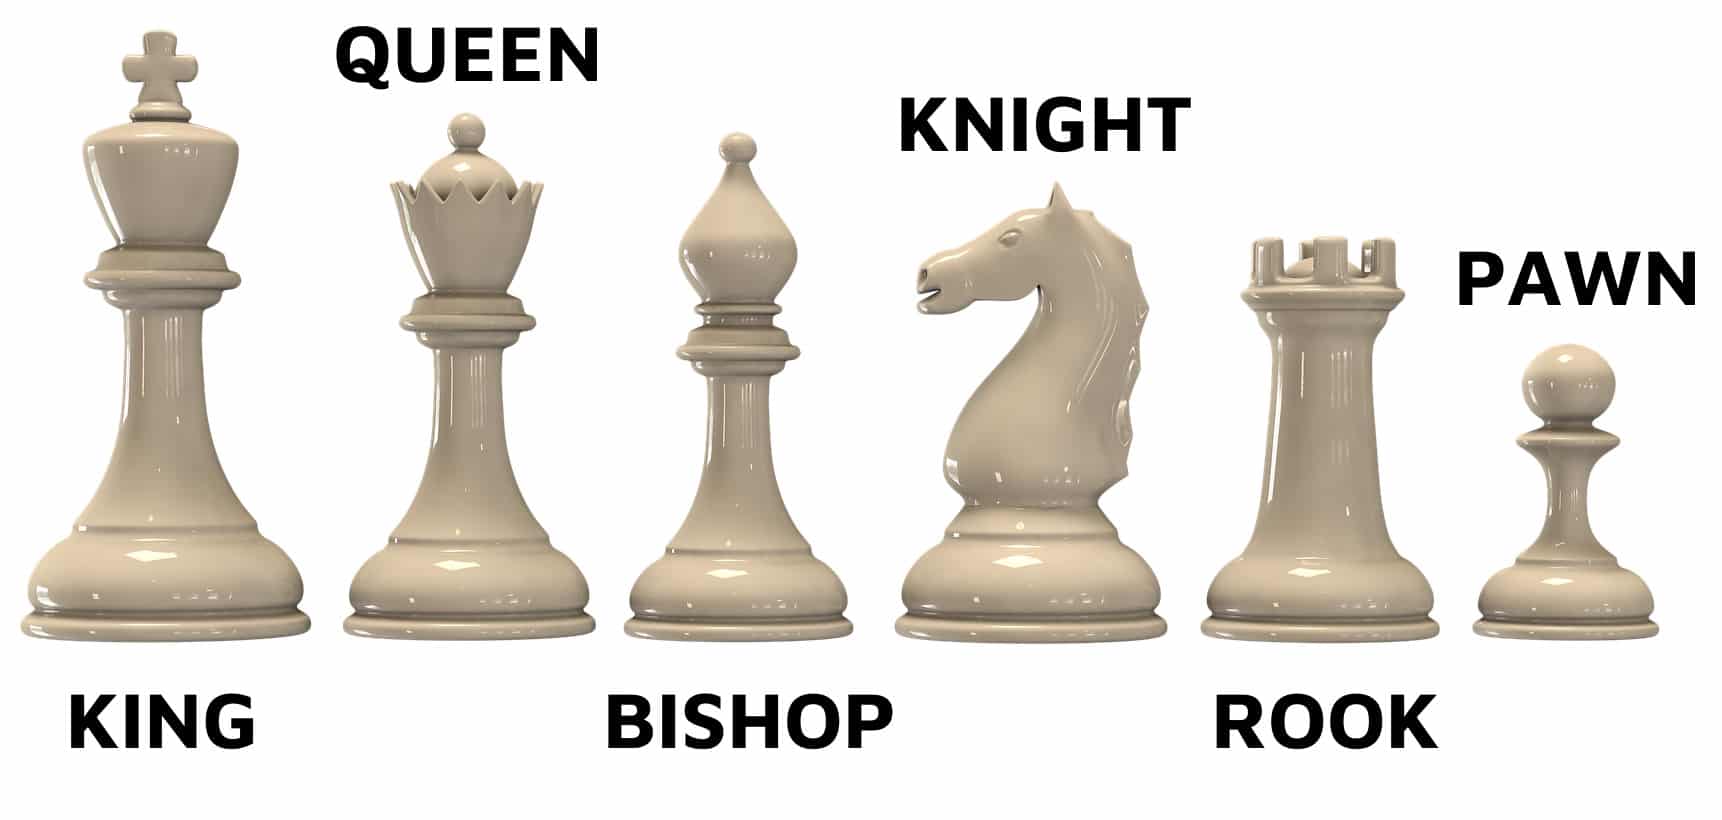 ▷ Chess 2 Player: The best ultimate guide